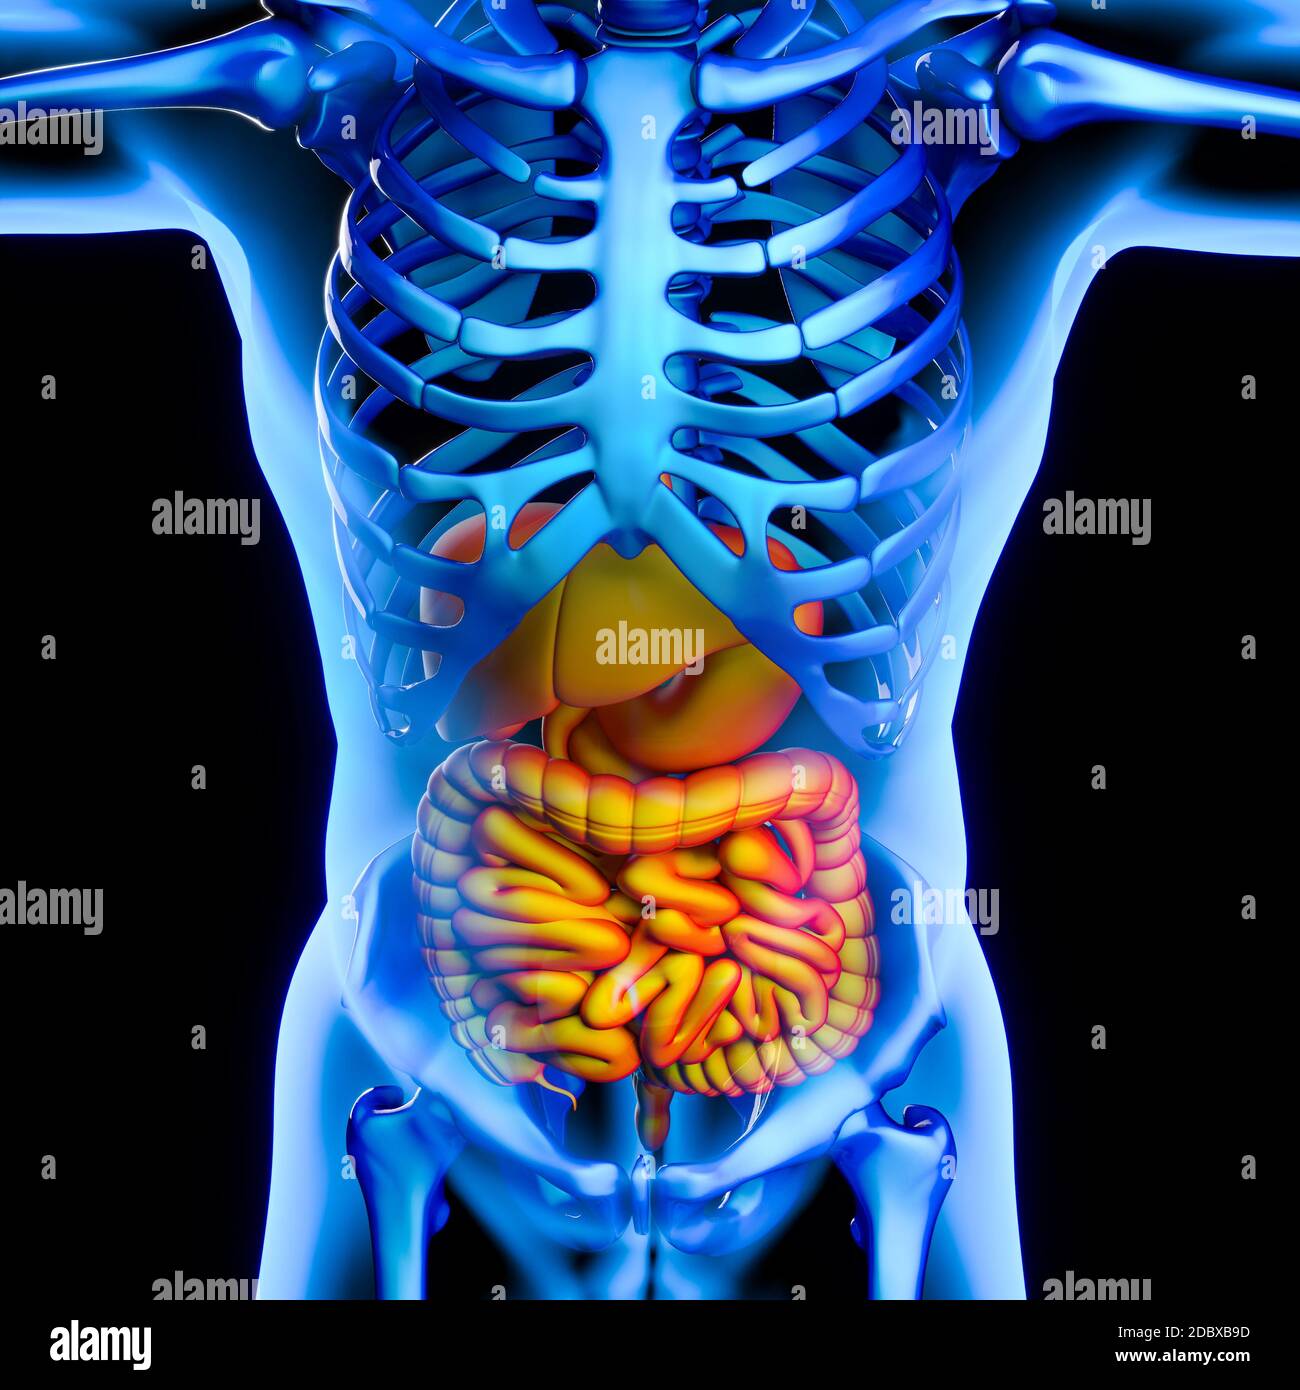 Illustrative medical image showing the digestive system. Concept of physical discomfort and health. 3d render. Stock Photo